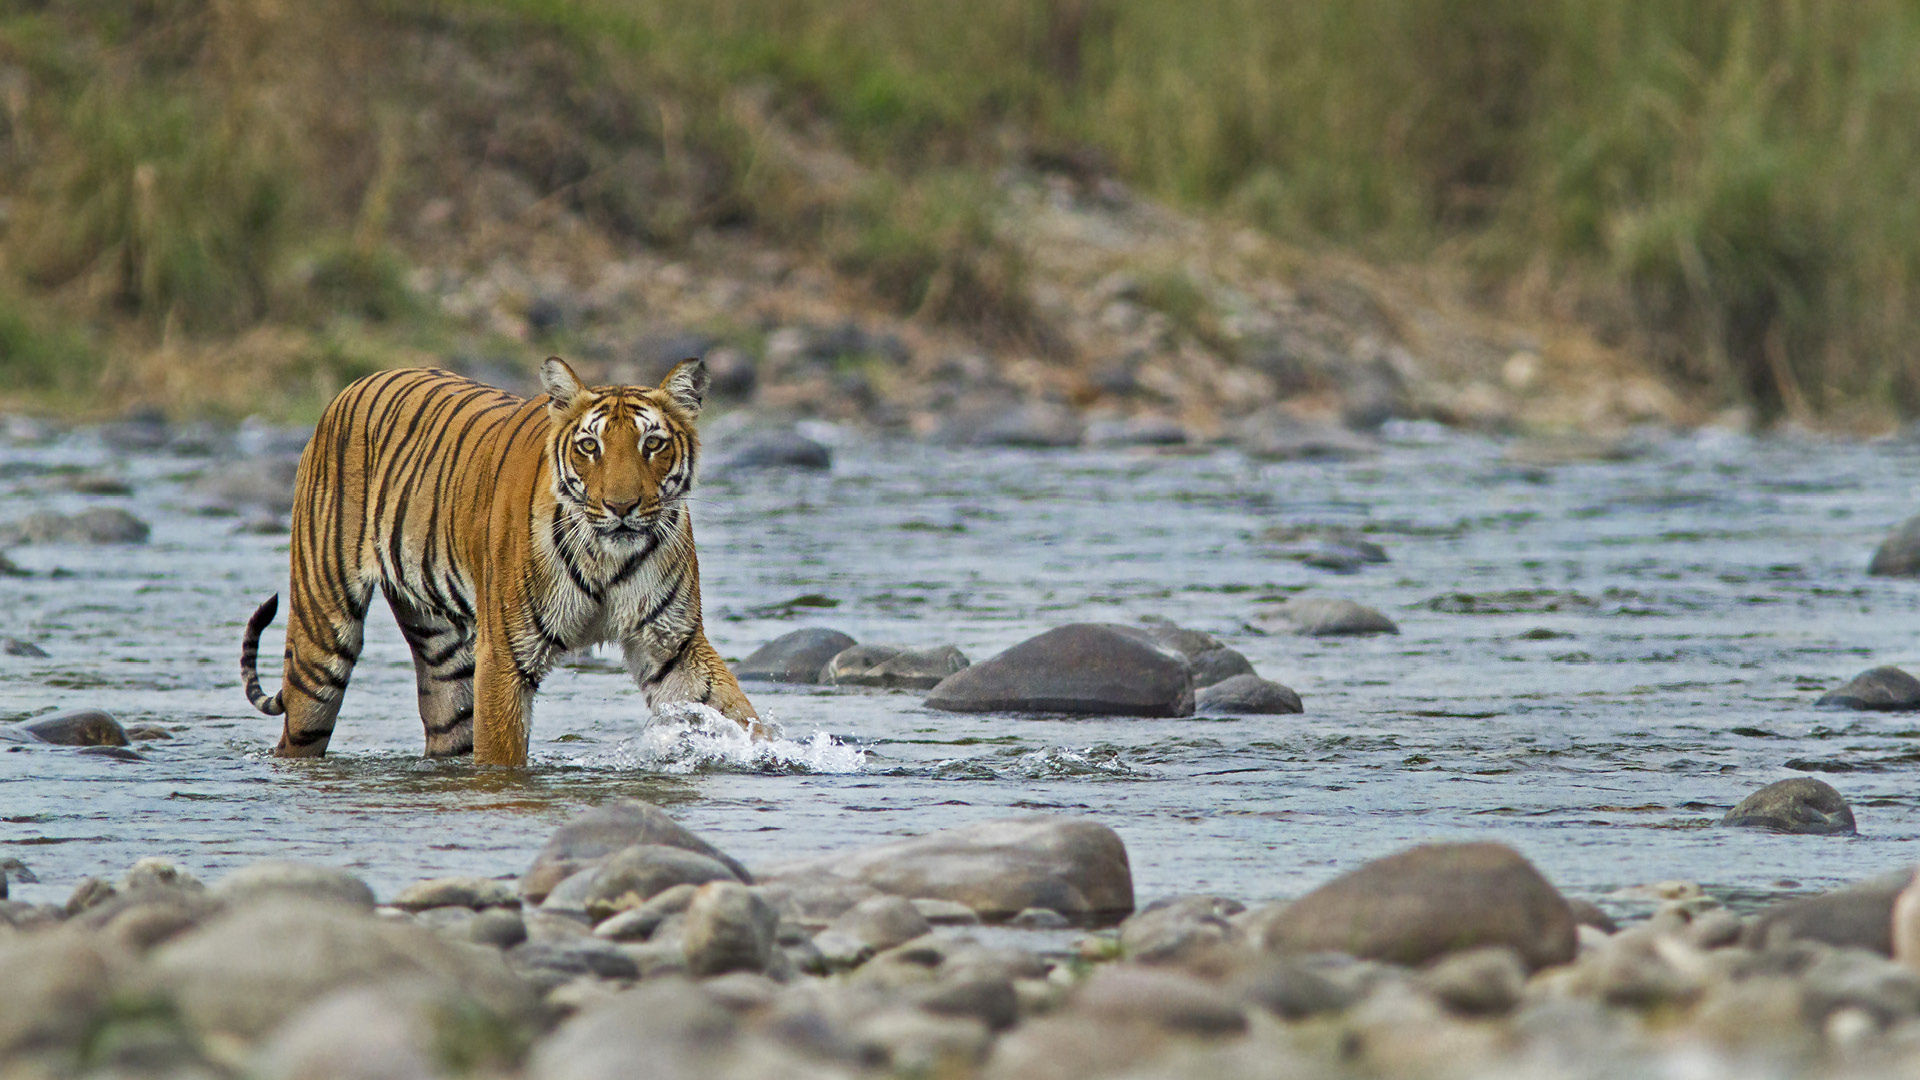 Jim Corbett National Park Now Has 252 Tigers Highest In The World!